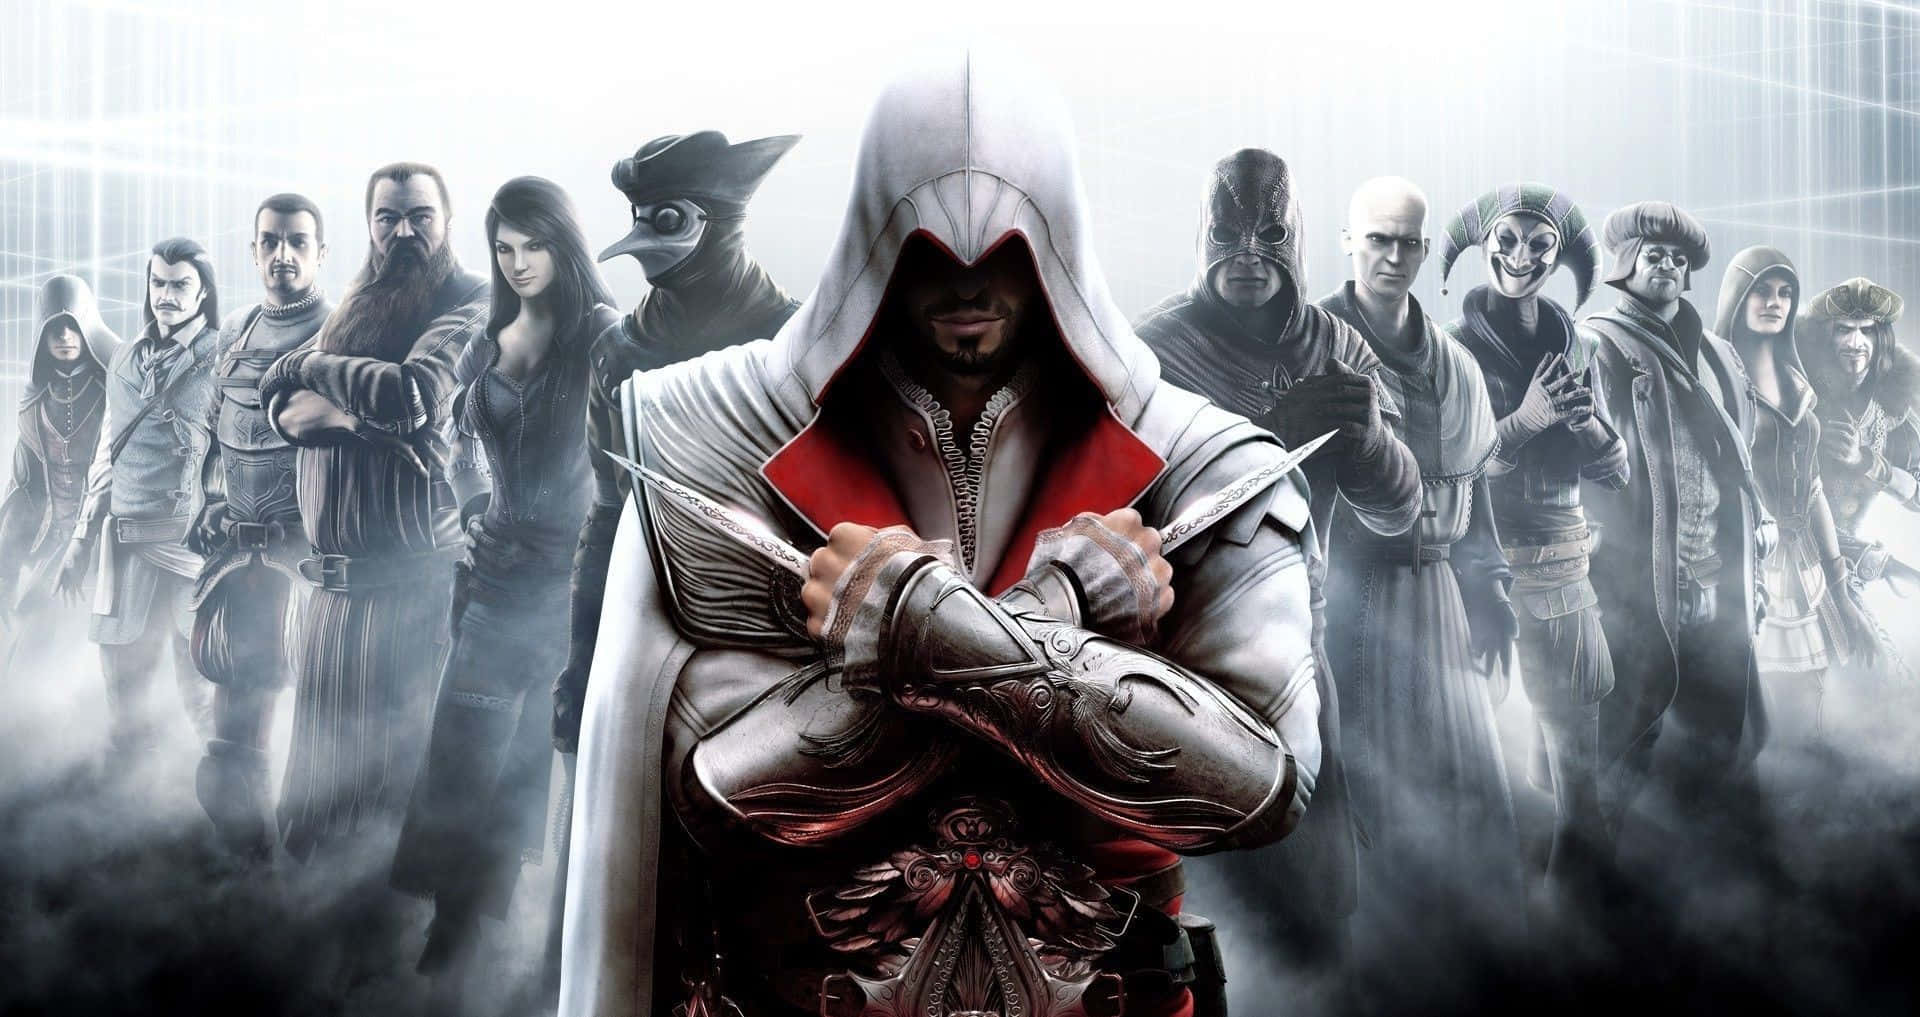 Epic Action in Assassin's Creed Brotherhood Wallpaper